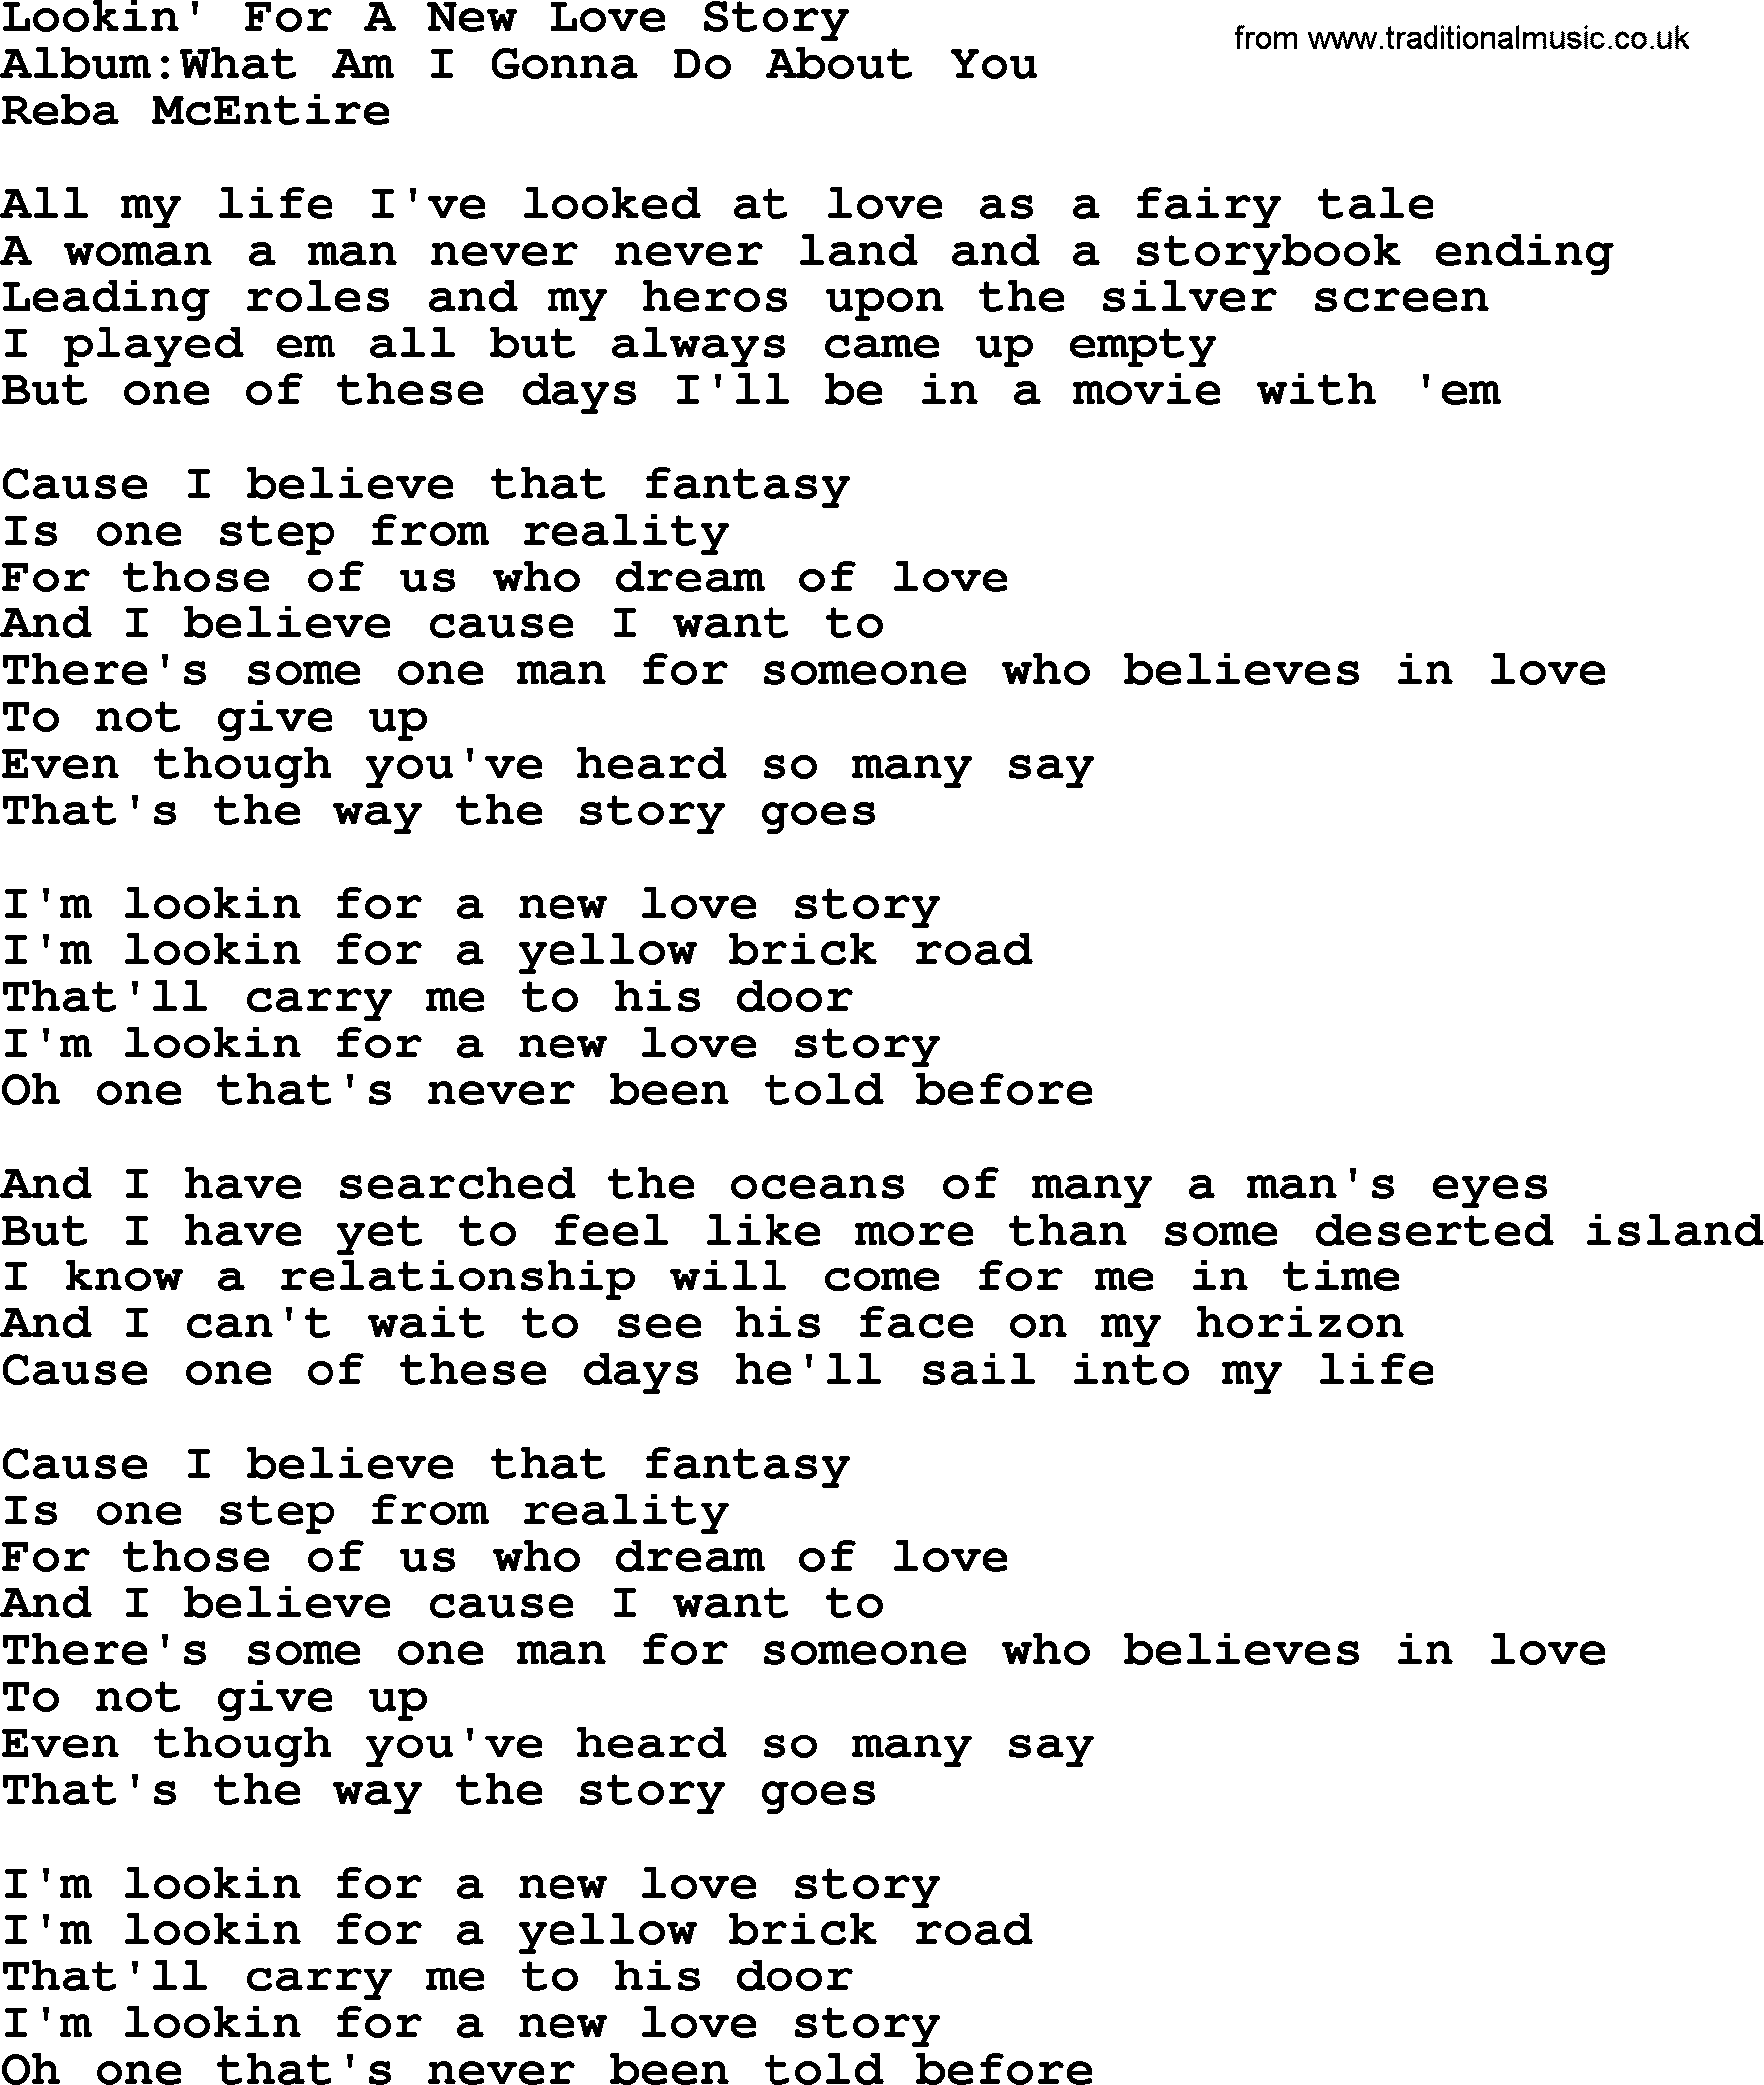 Reba McEntire song: Lookin' For A New Love Story lyrics